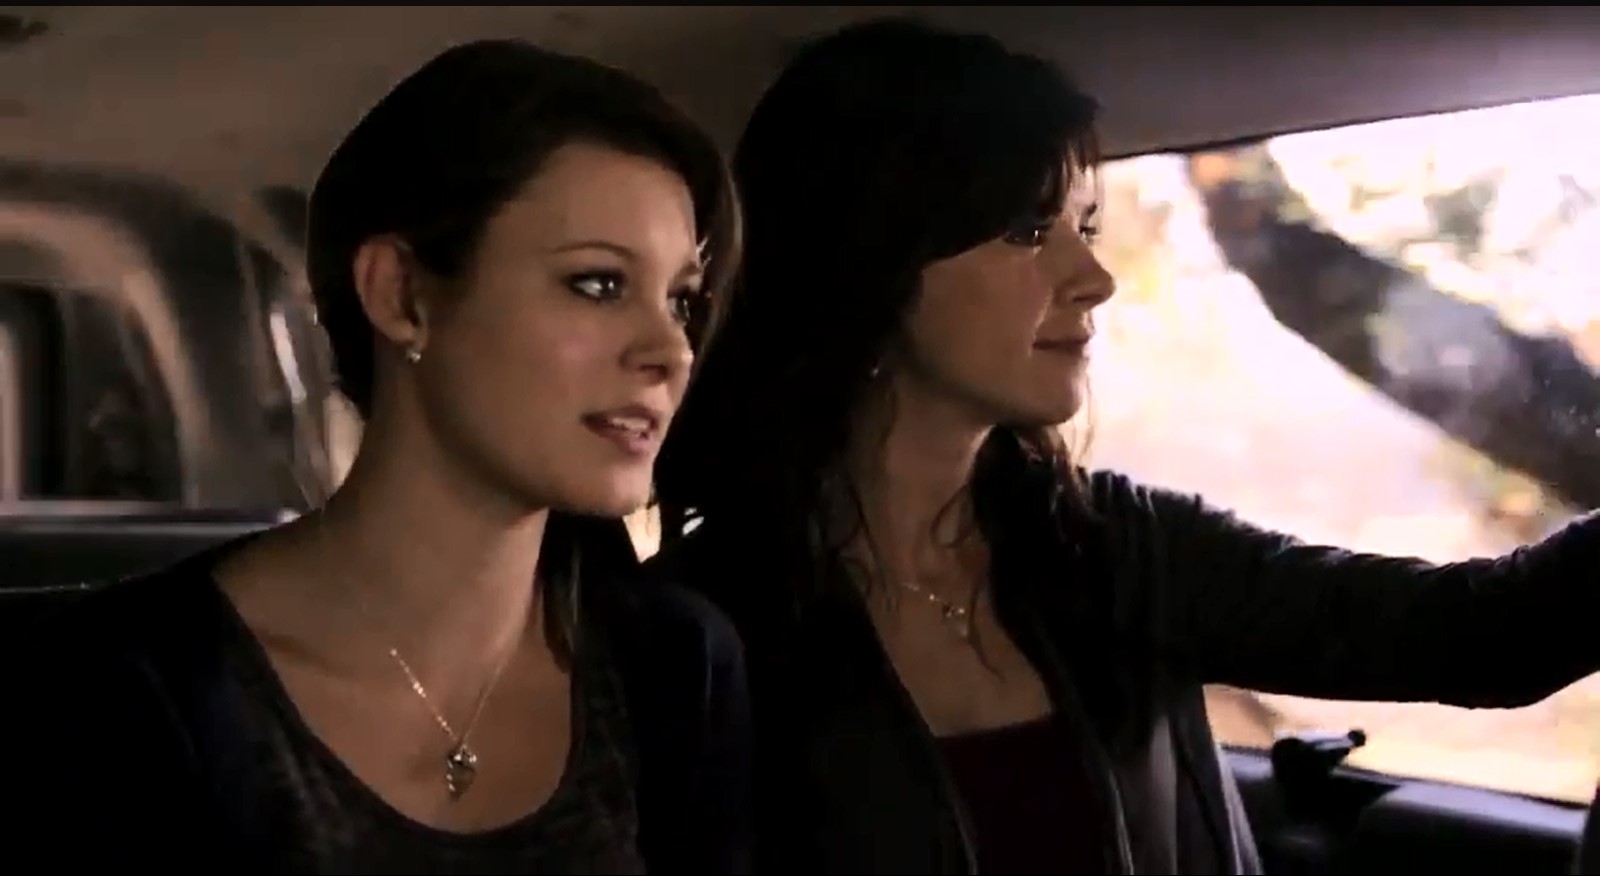 Dawn and Kayla played by Amy Pietz and Tracey Fairaway